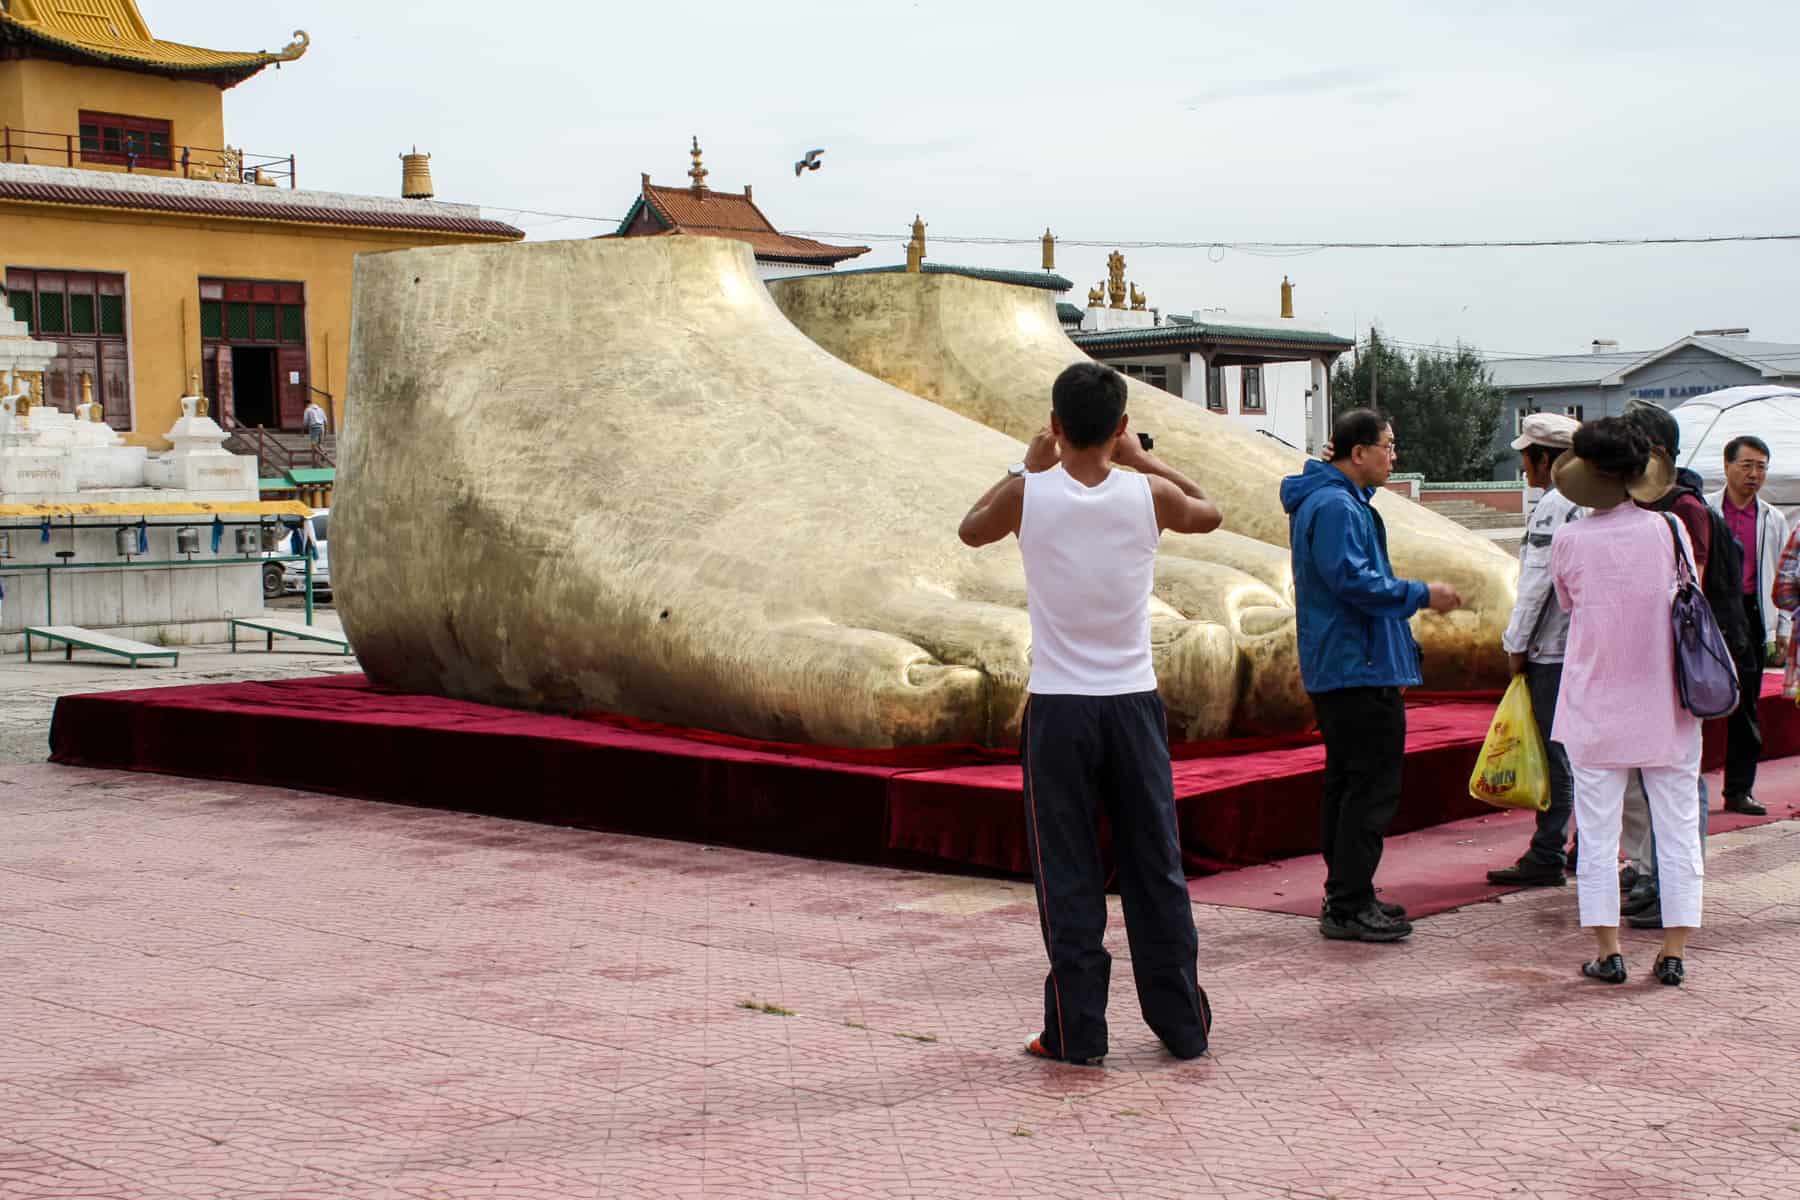 Three people photographing a pair of giant Golden statue feet outside the Gandan Monastery Ulaanbaatar Mongolia